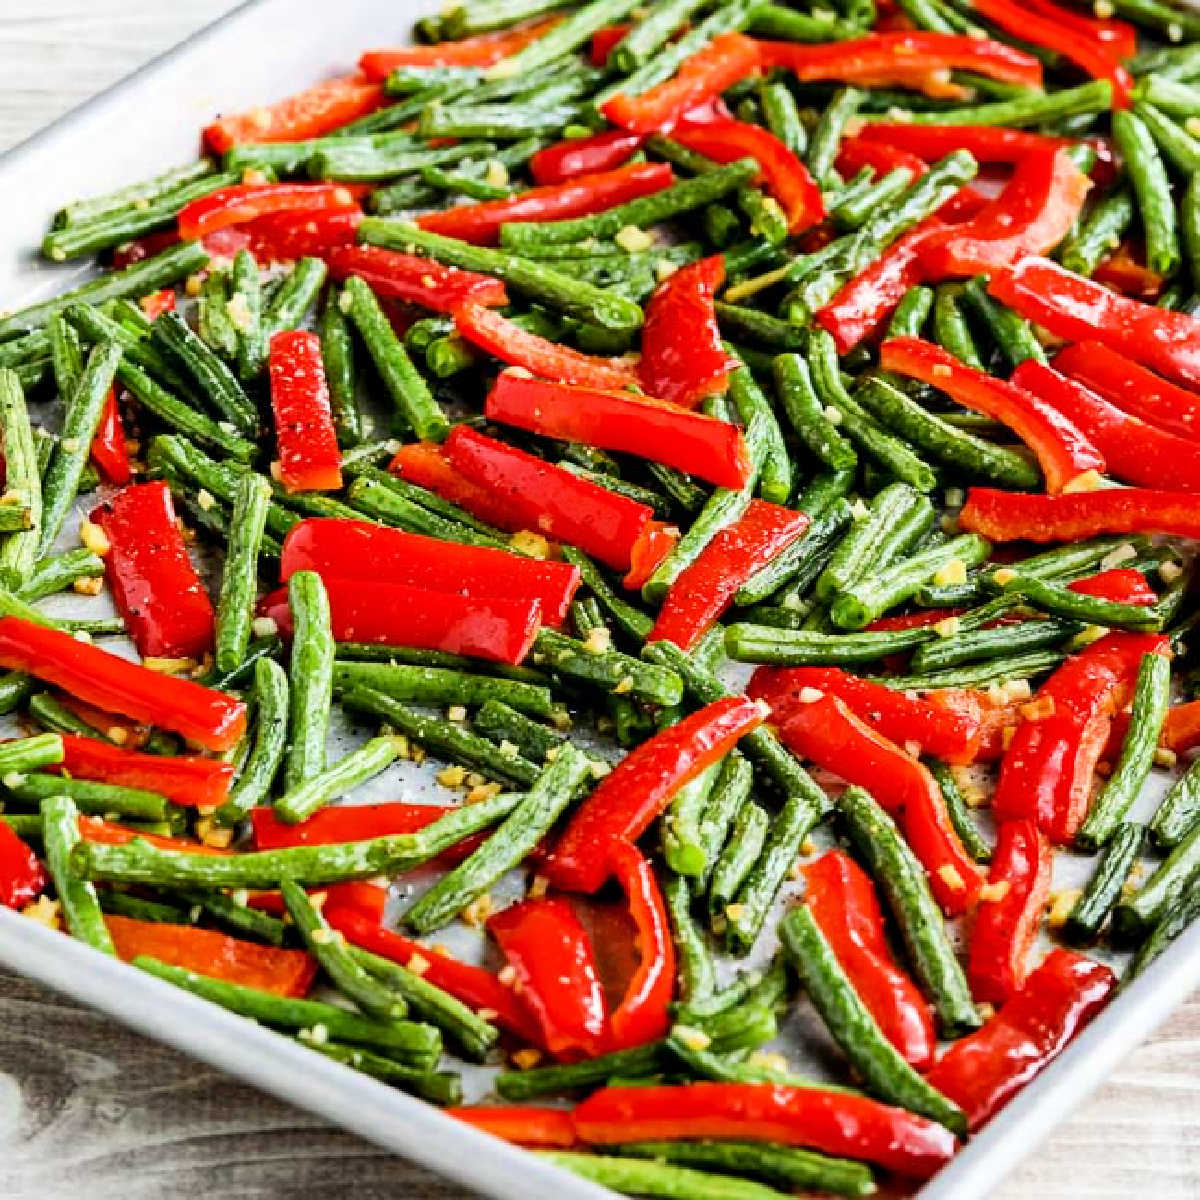 Square image of Roasted Green Beans and Red Peppers shown on baking sheet.